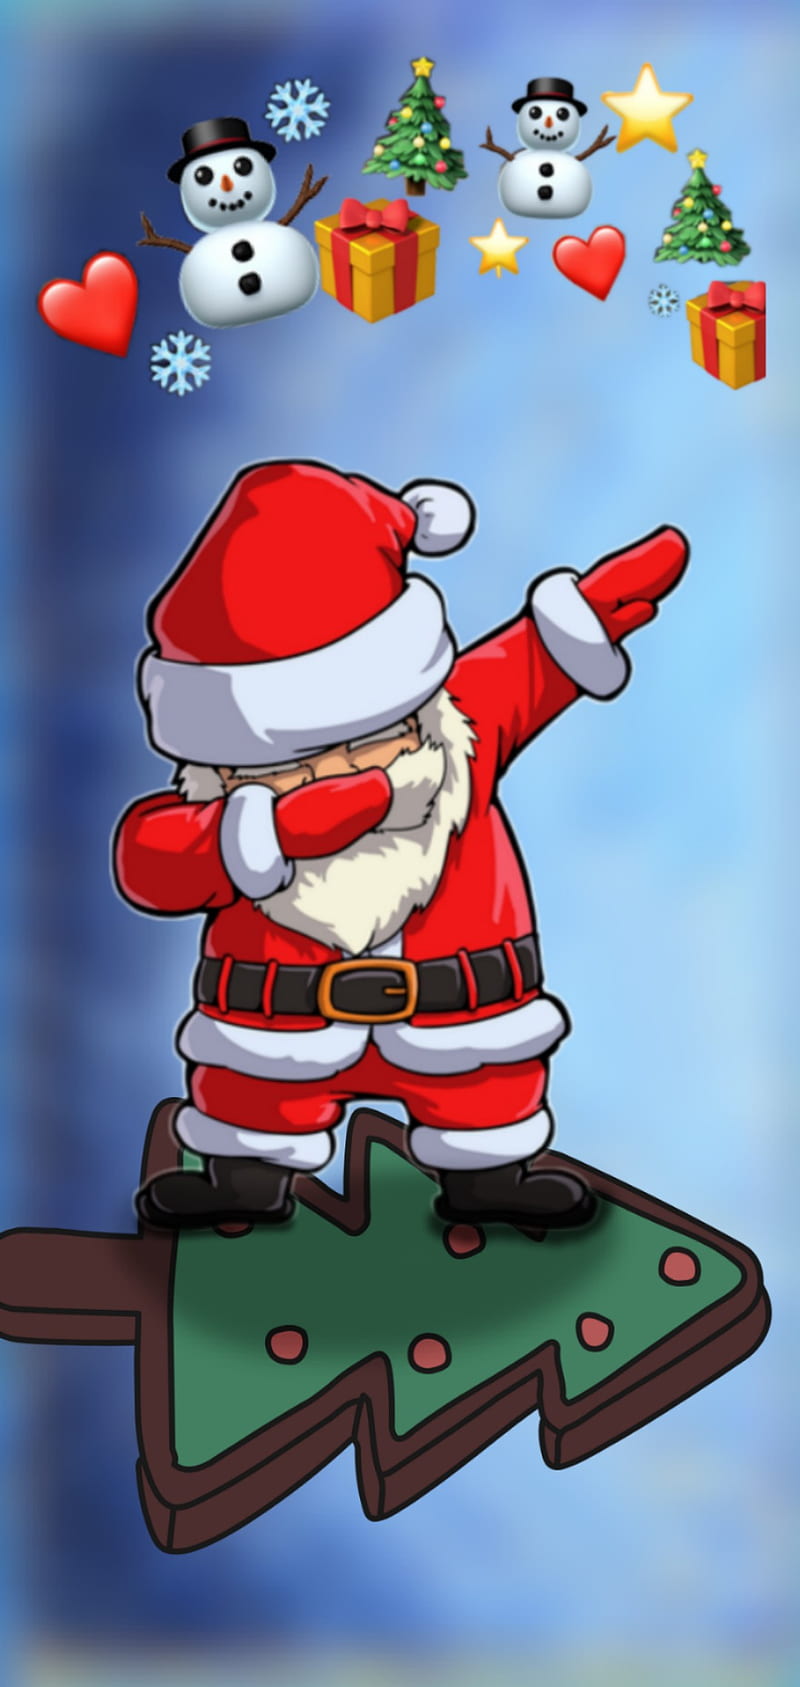 Santa Claus Wallpapers (23+ images inside)